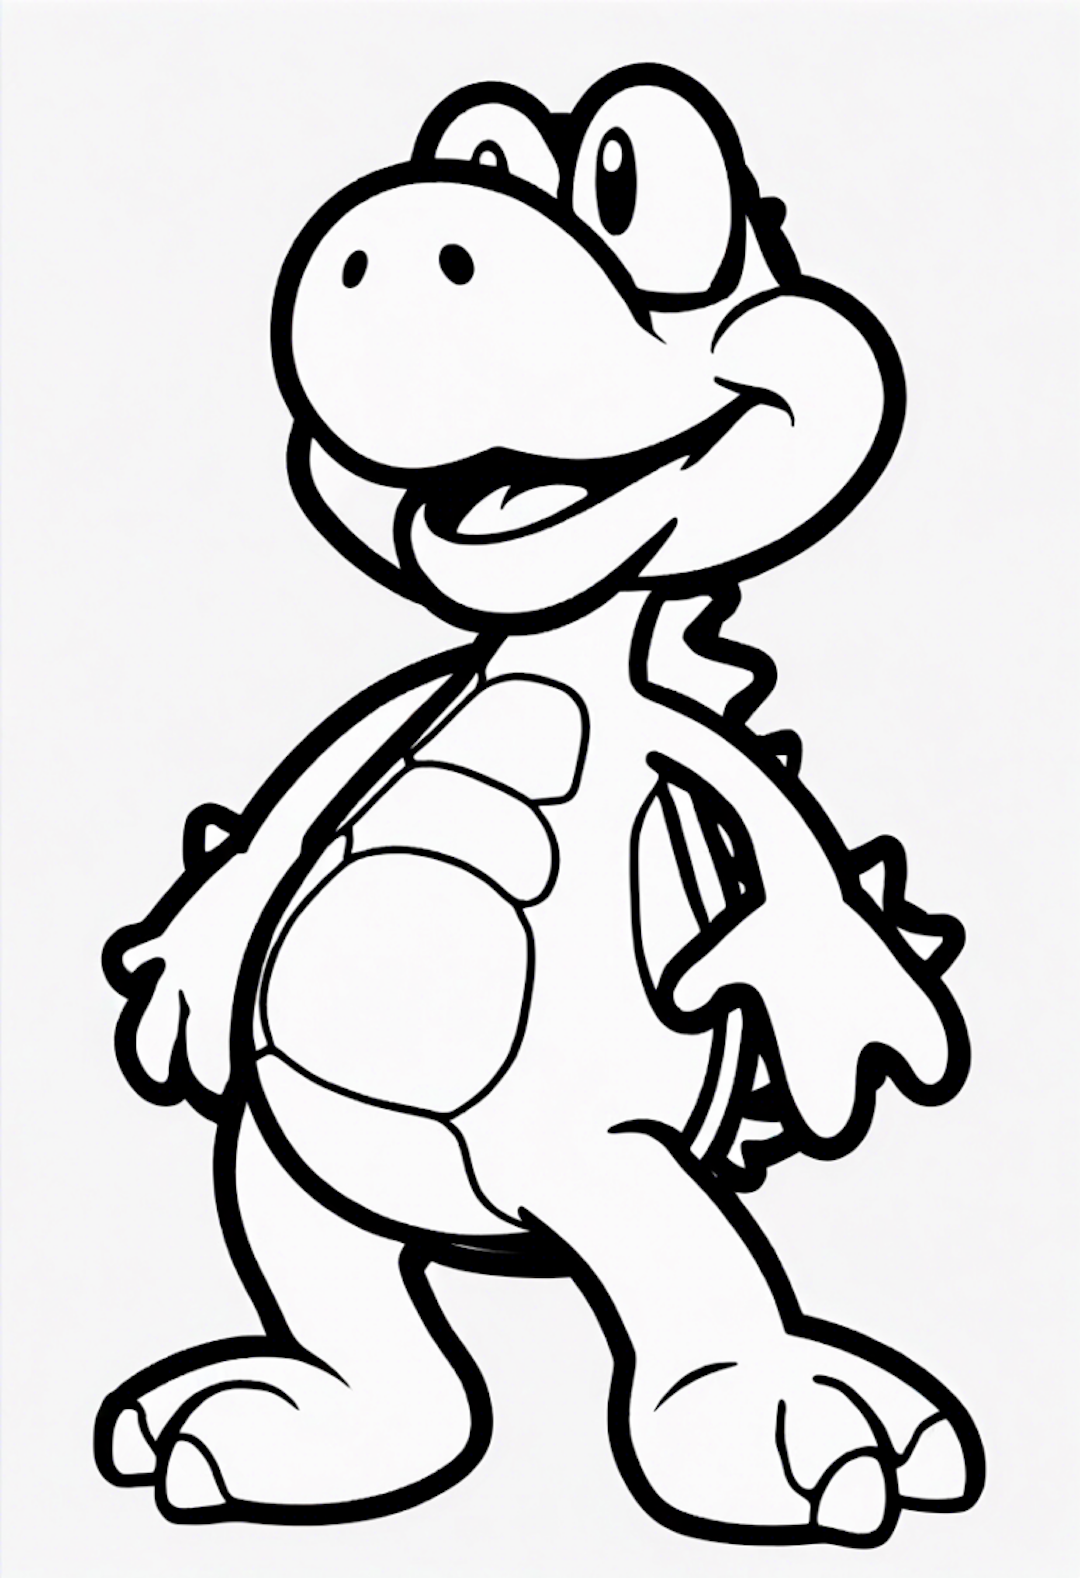 Yoshi coloring pages